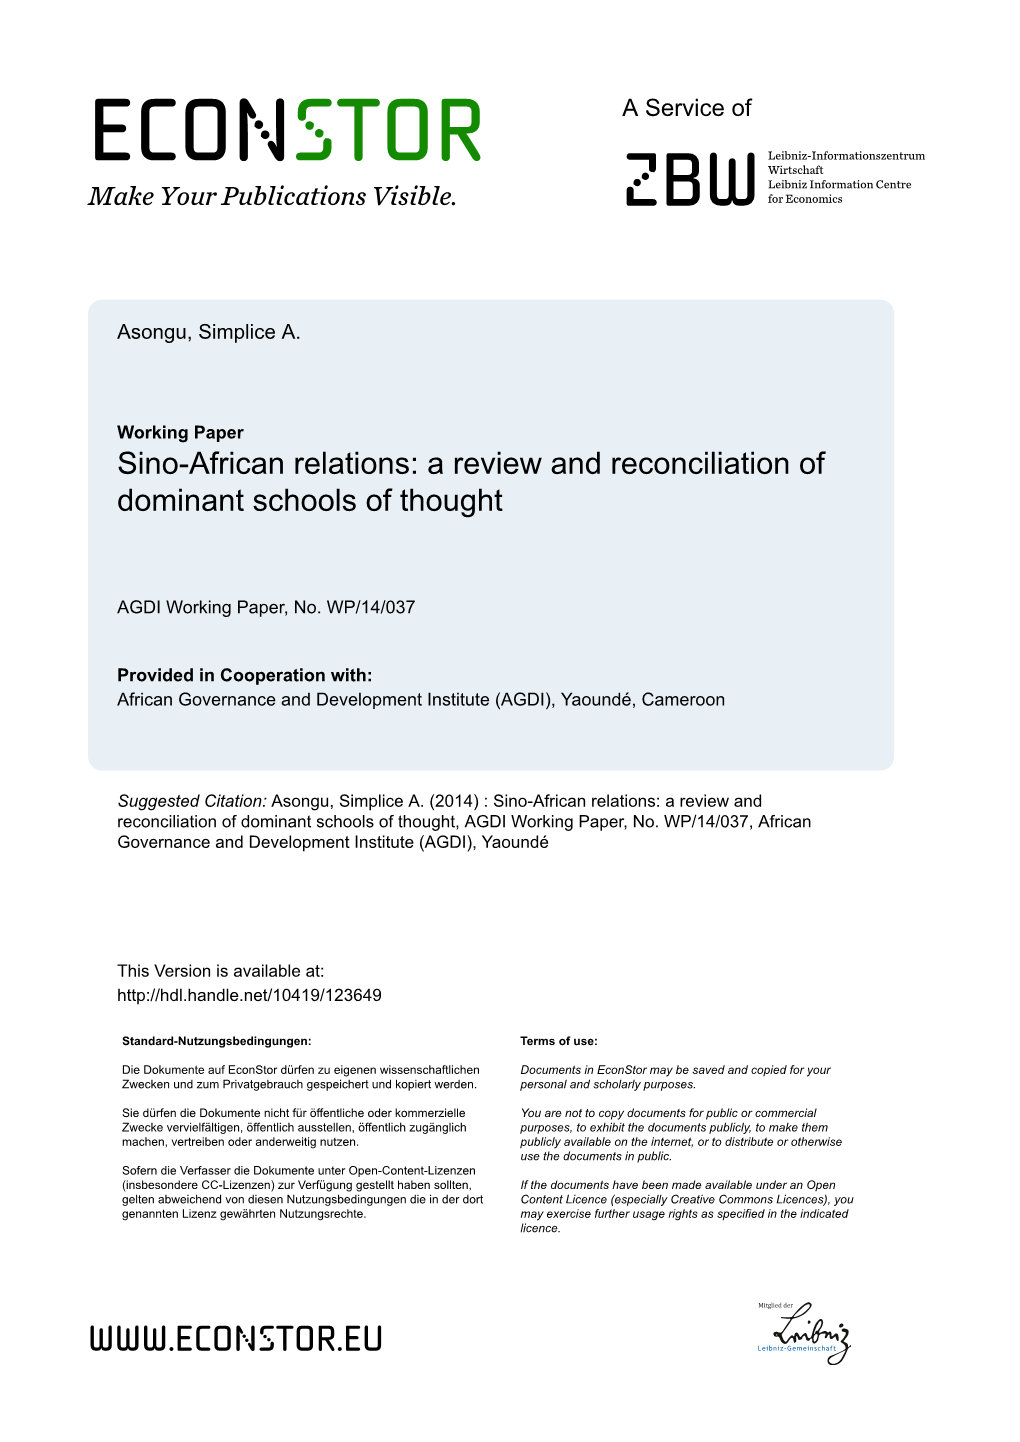 Sino-African Relations: a Review and Reconciliation of Dominant Schools of Thought